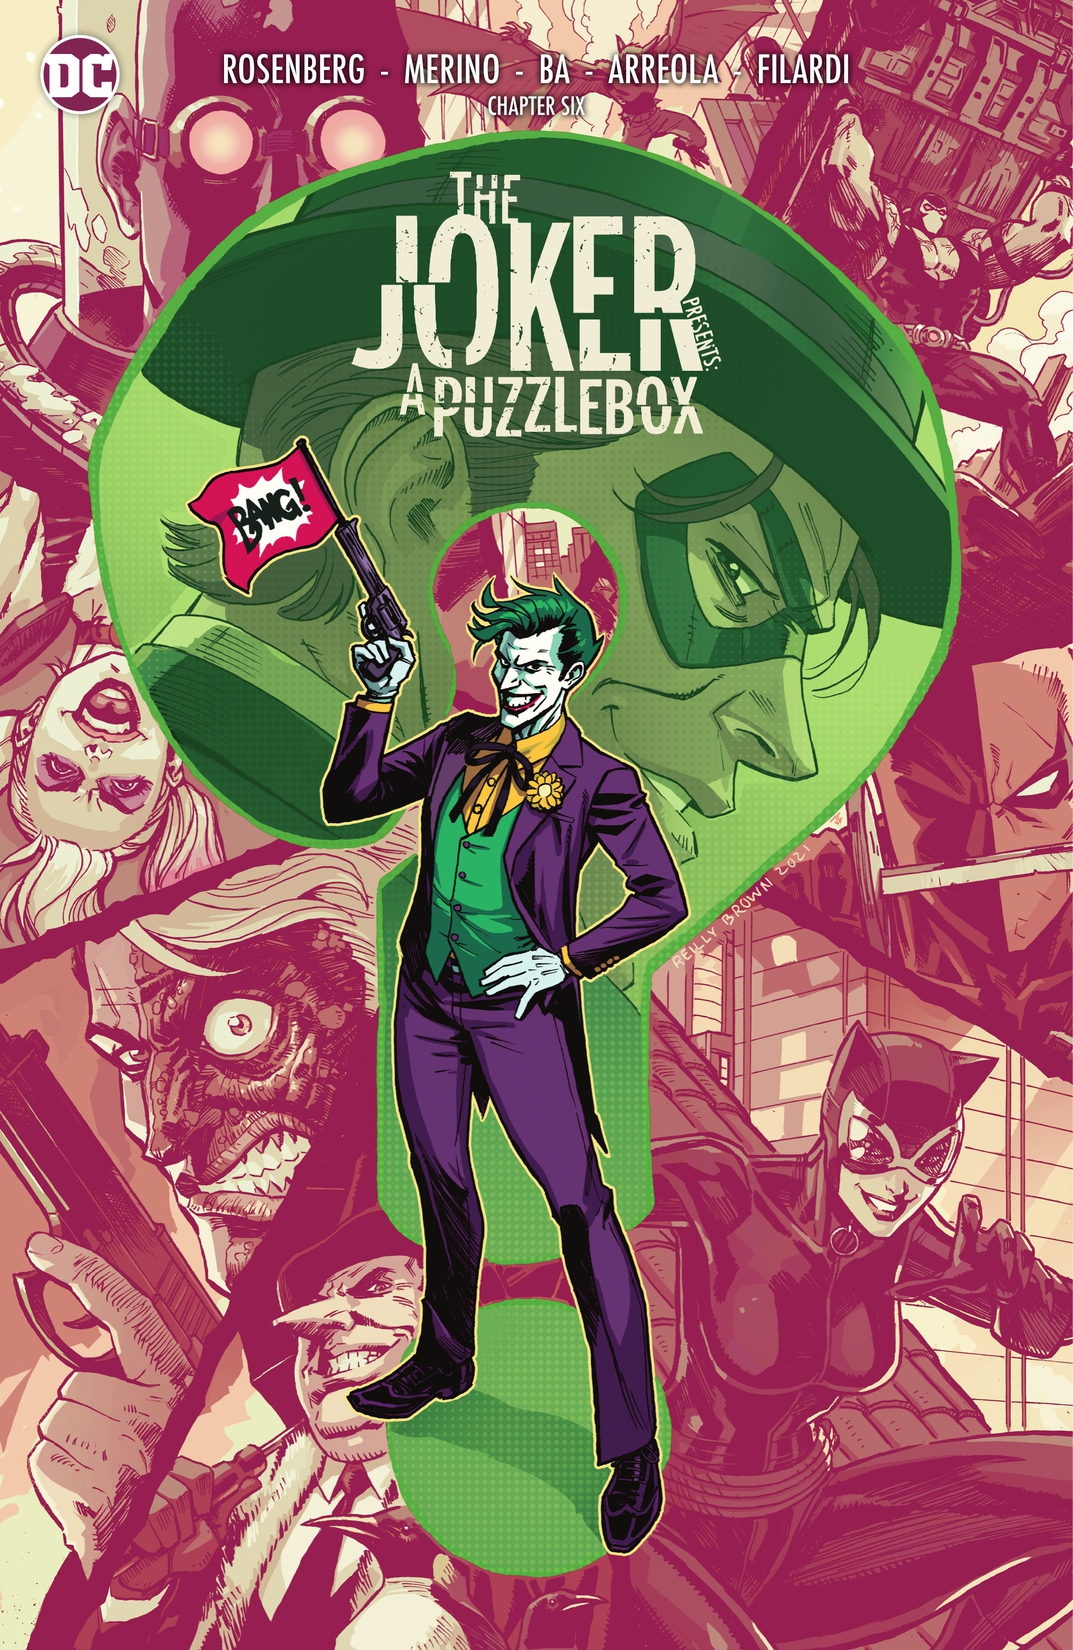 The Joker Presents: A Puzzlebox Director's Cut #6 preview images